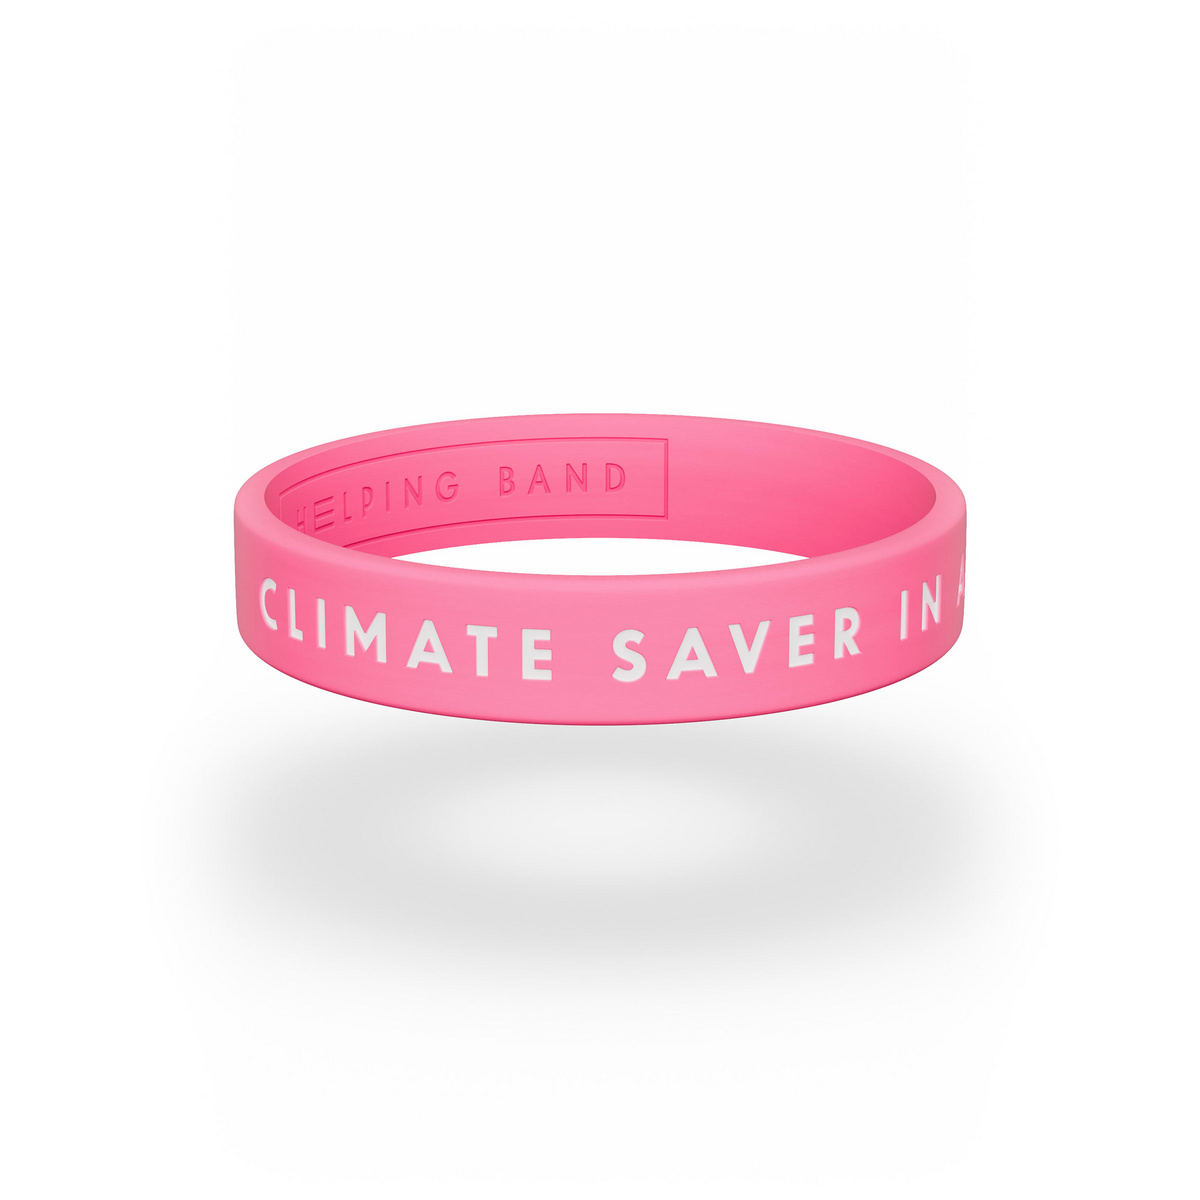 Helping Band Climate Saver in Action Armband